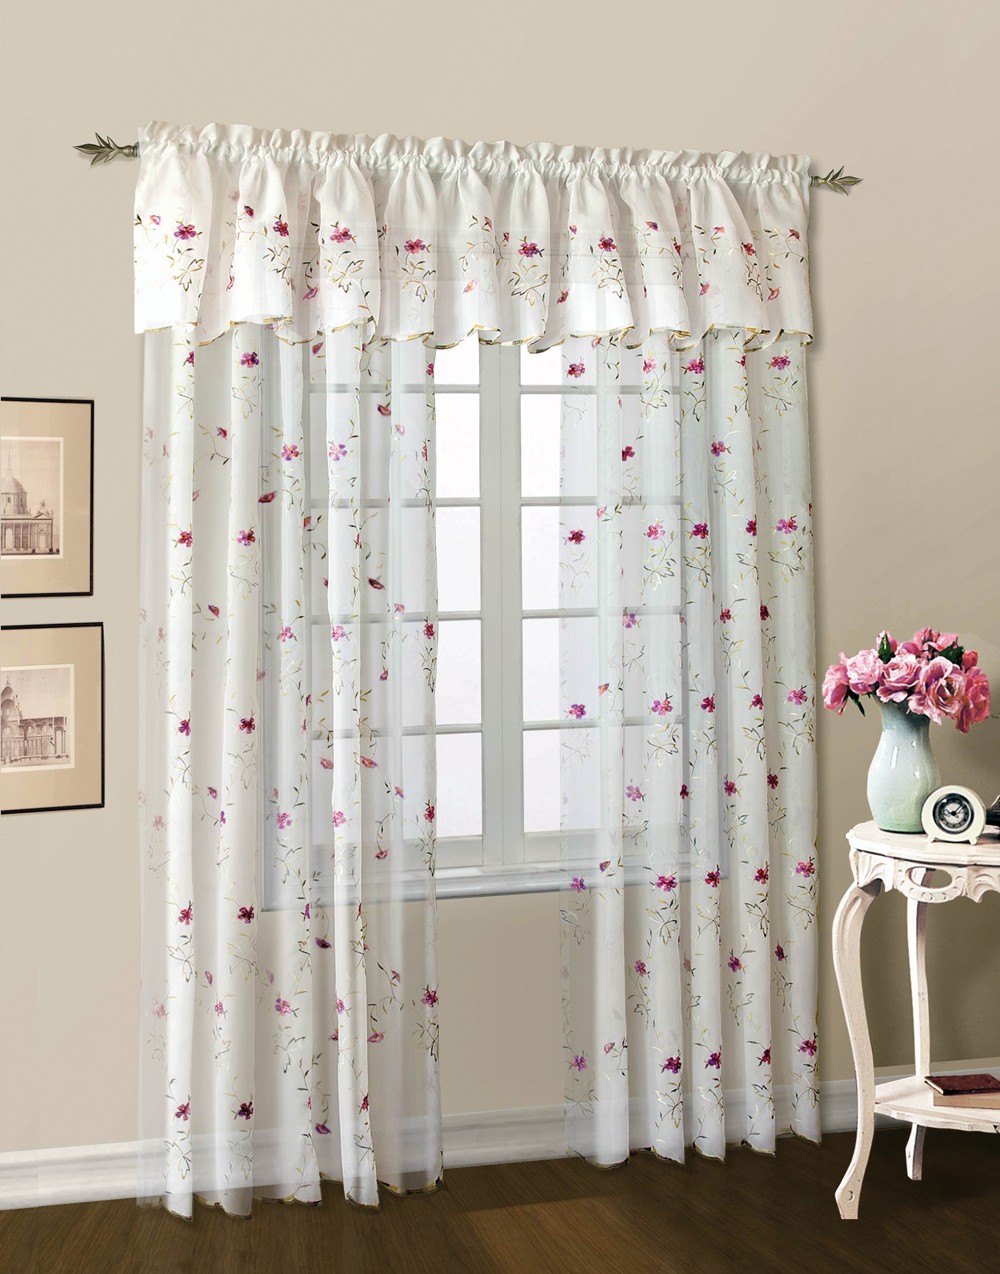 Embroidered Sheer Curtains in Curtain